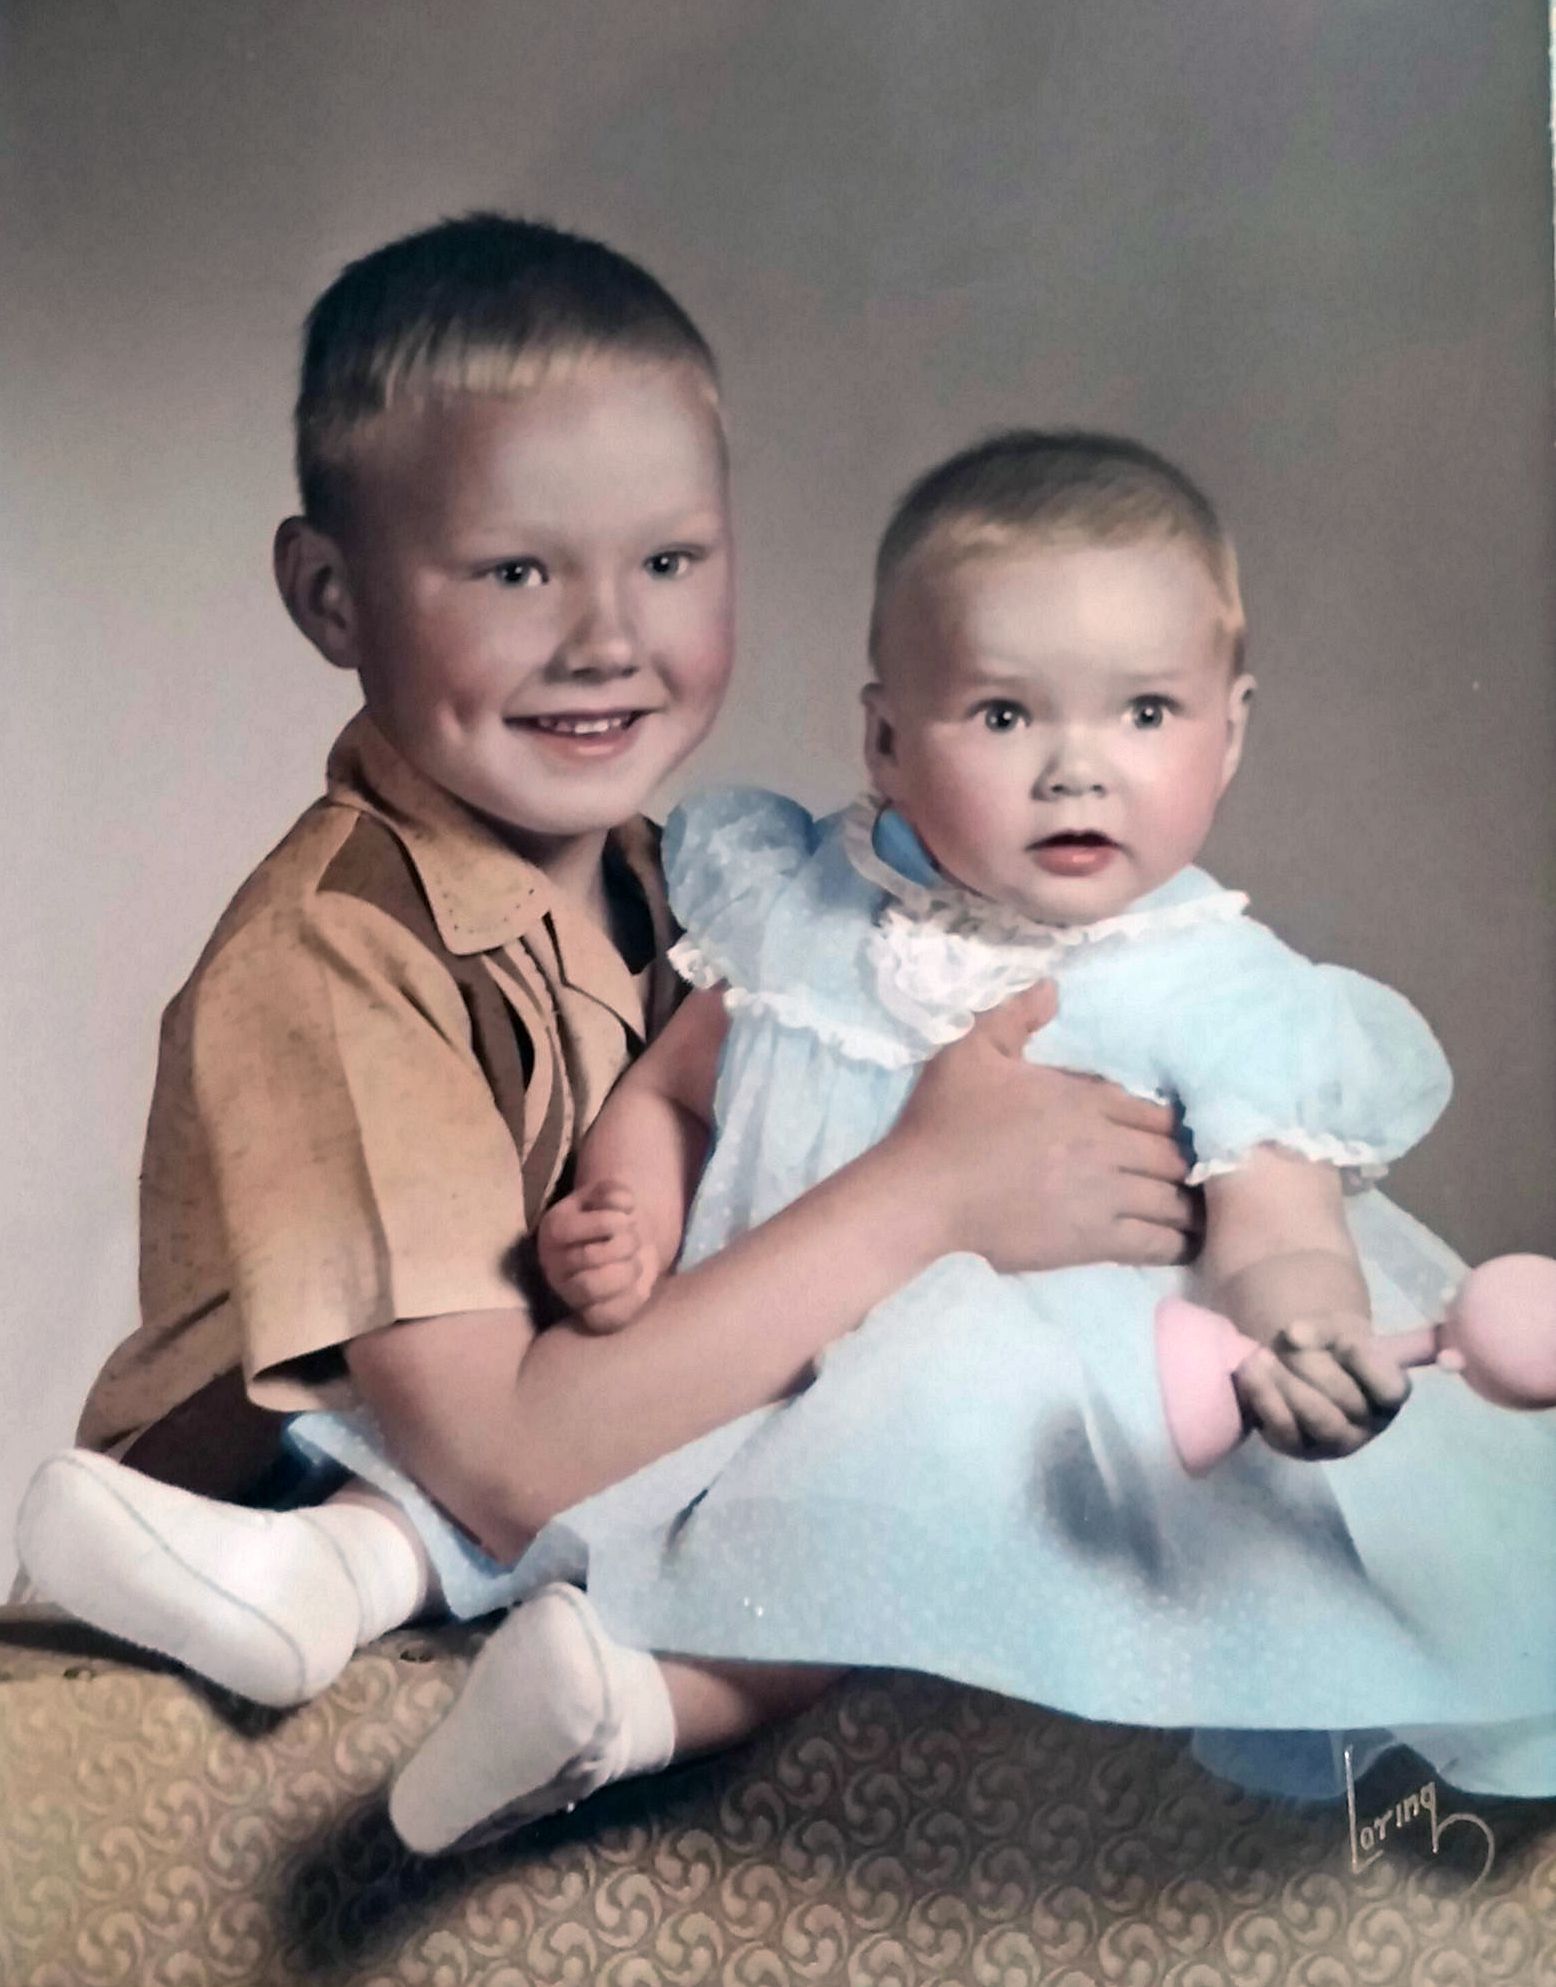 Susan and her older brother, ca. 1955